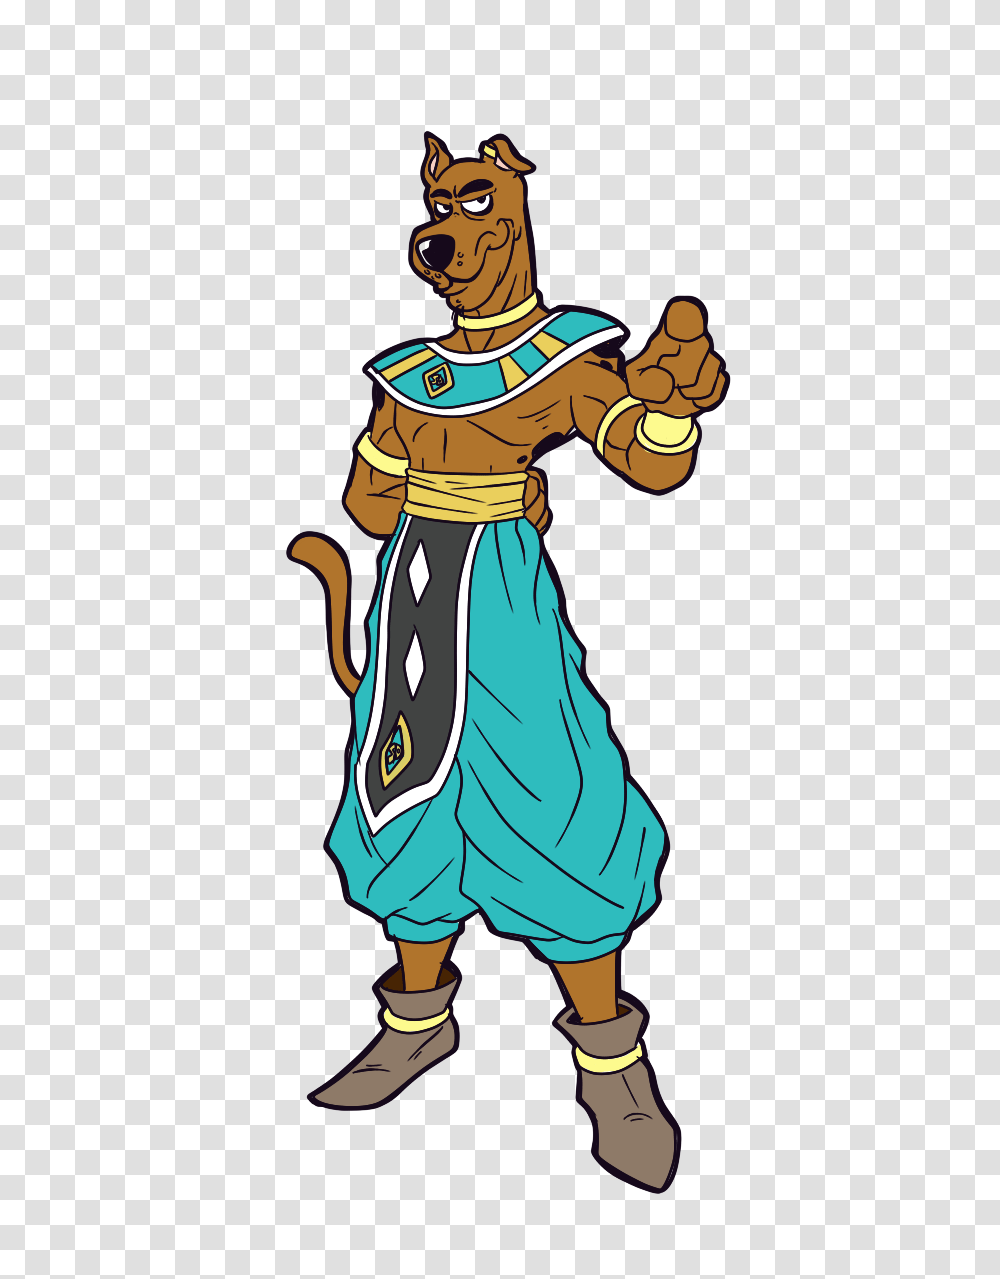 God Of Destruction Scooby Doo Crossovers Scooby, Person, Label Transparent Png